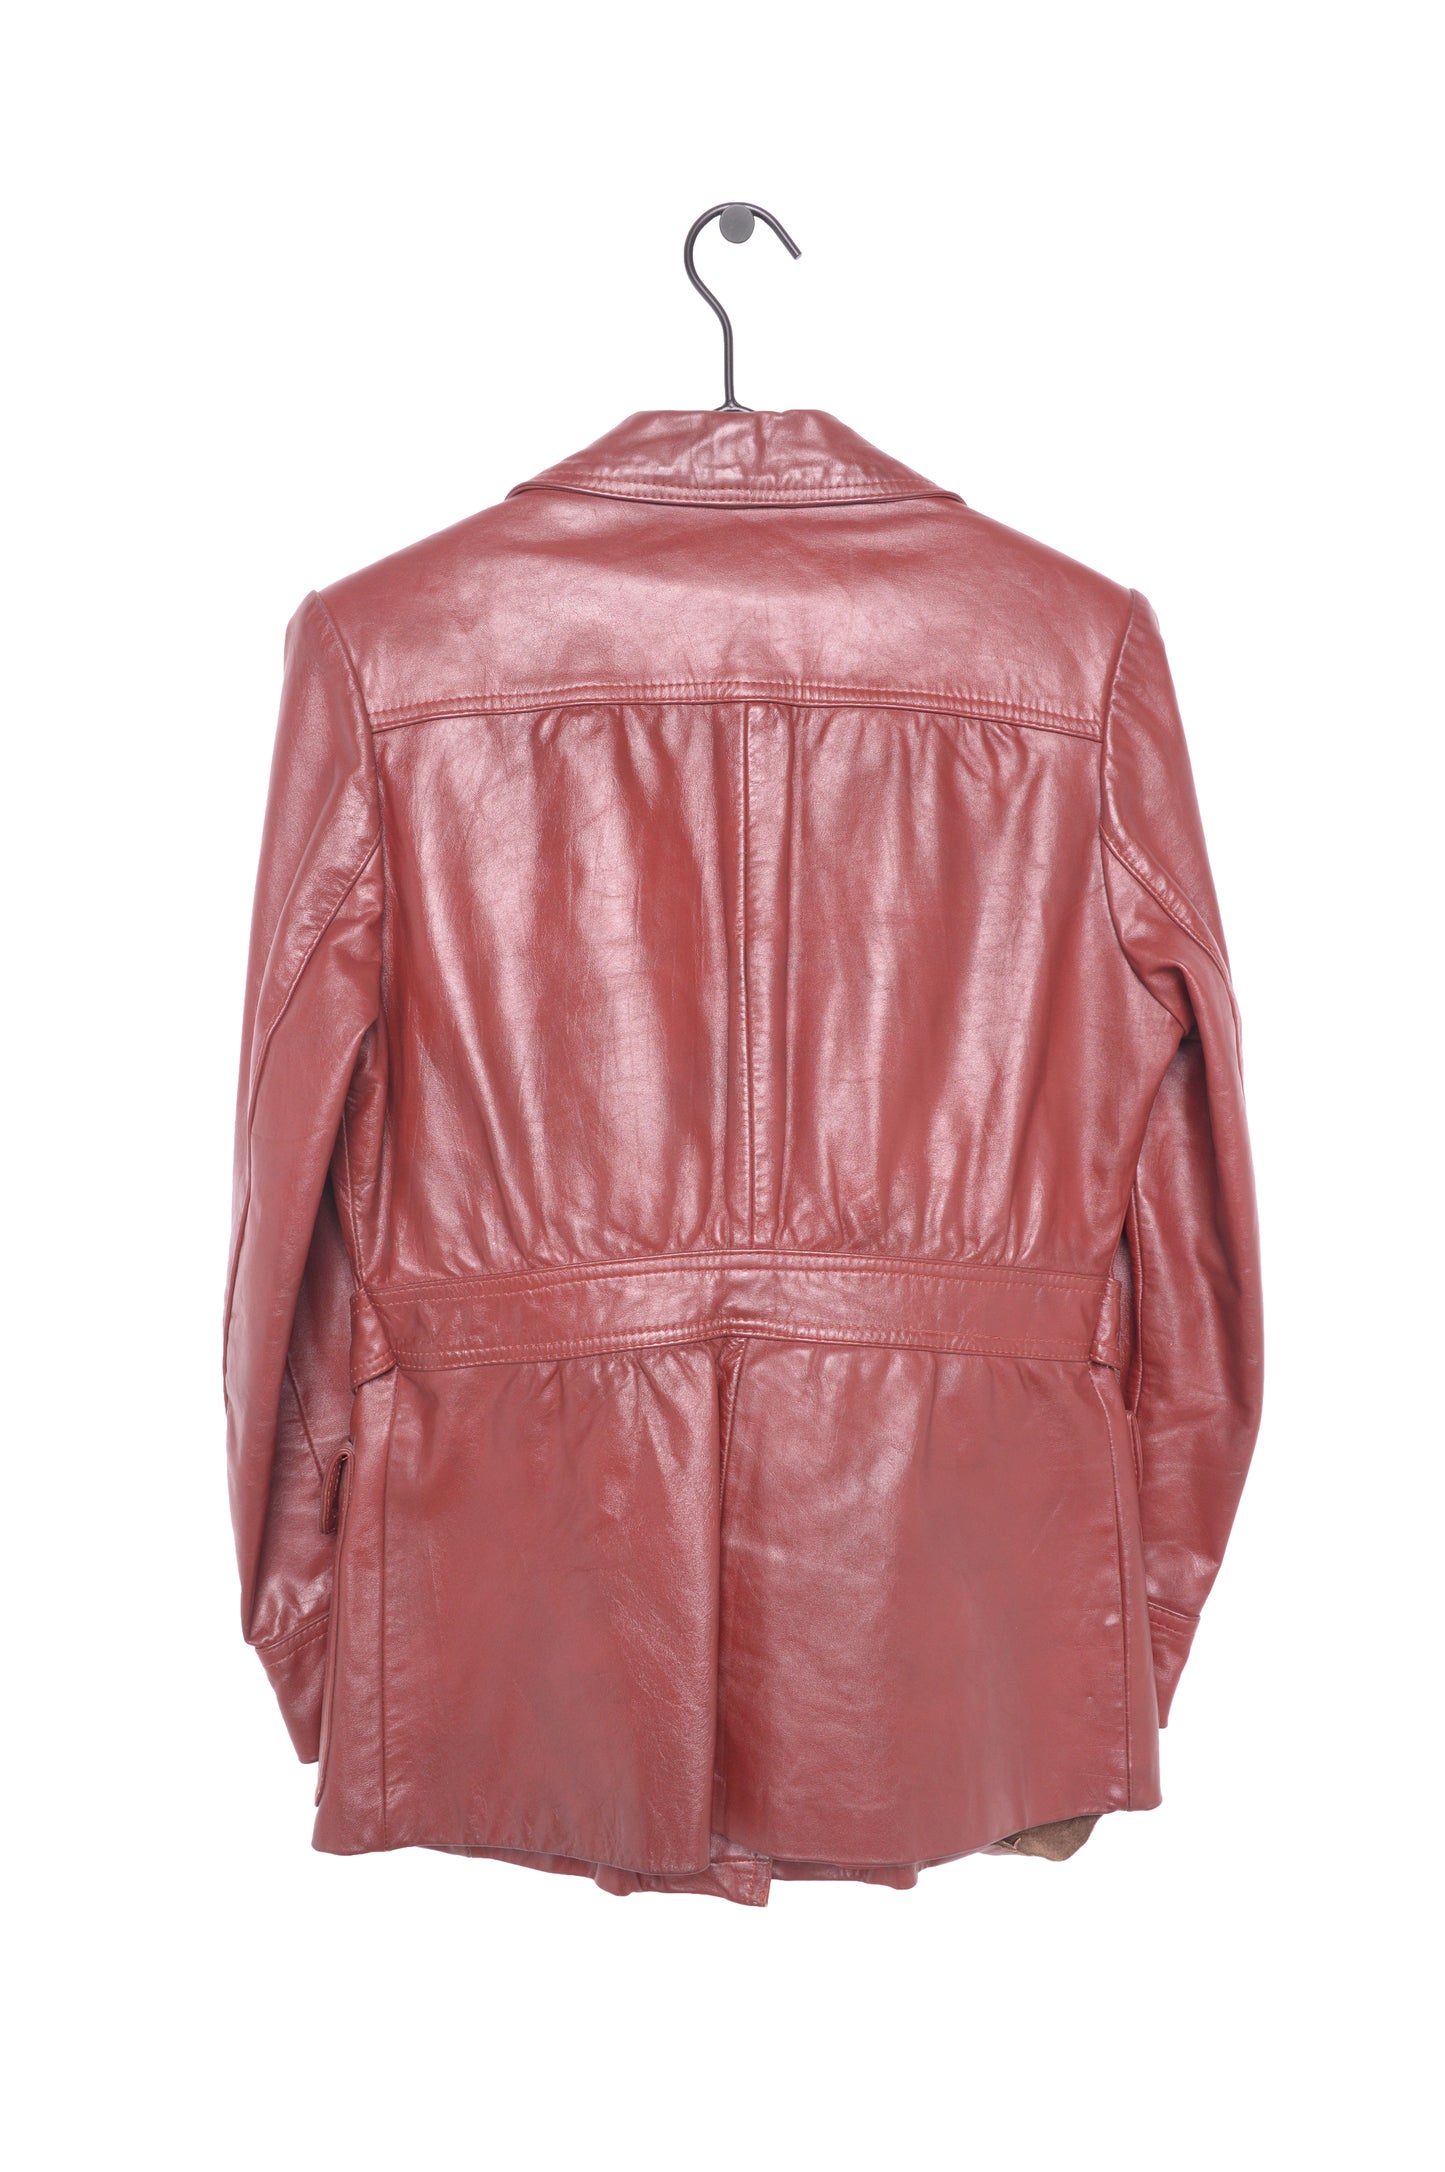 1980s Berman's Belted Leather Jacket